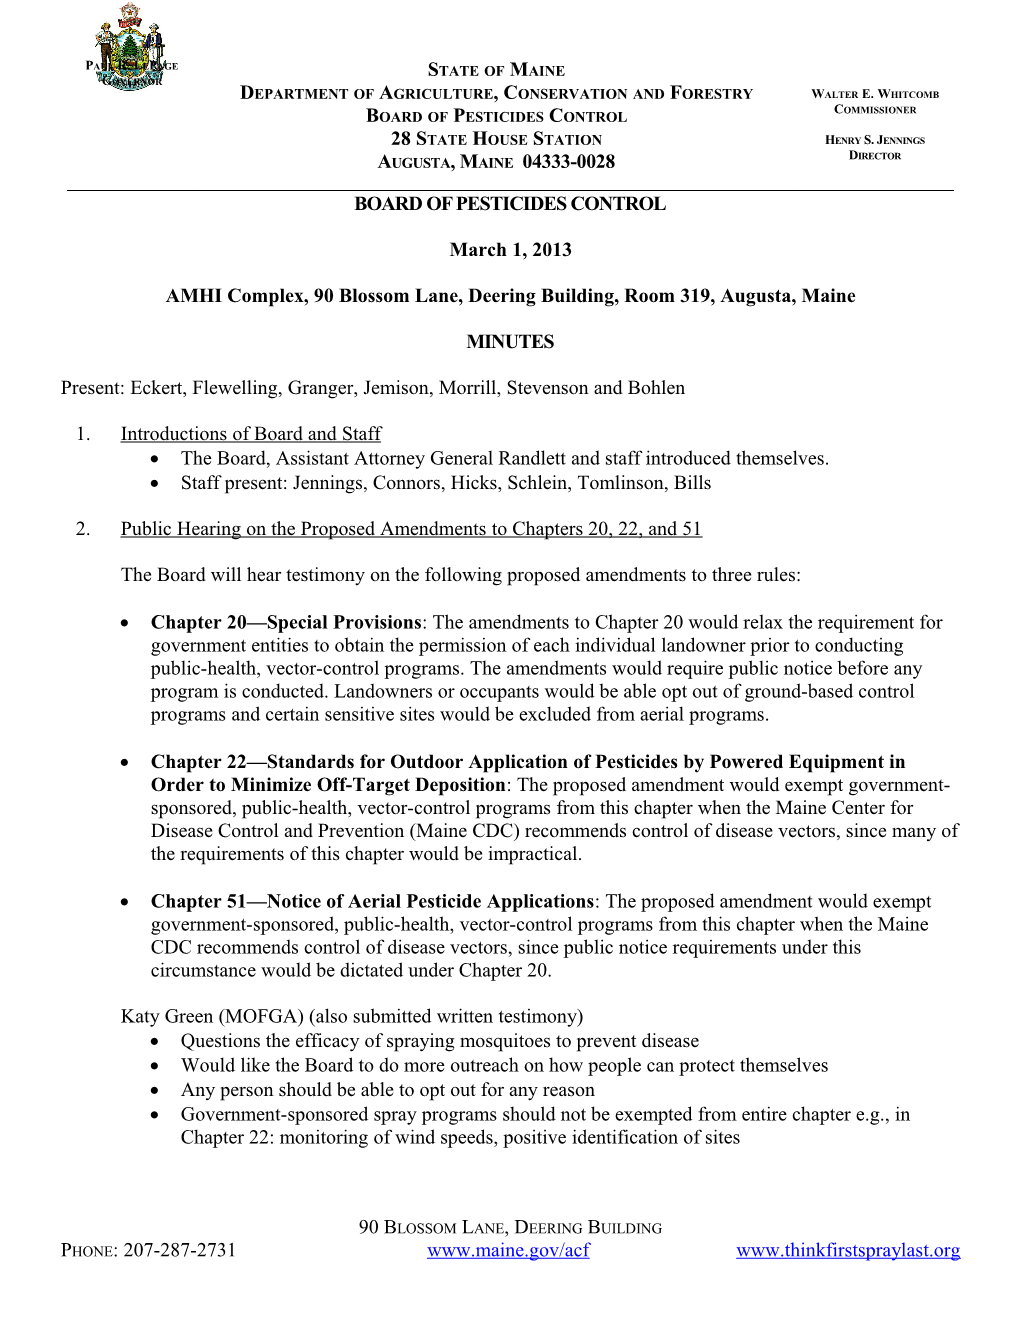 Page 1 of 15 Meeting Minutes Maine Board of Pesticides Control, March 1, 2013